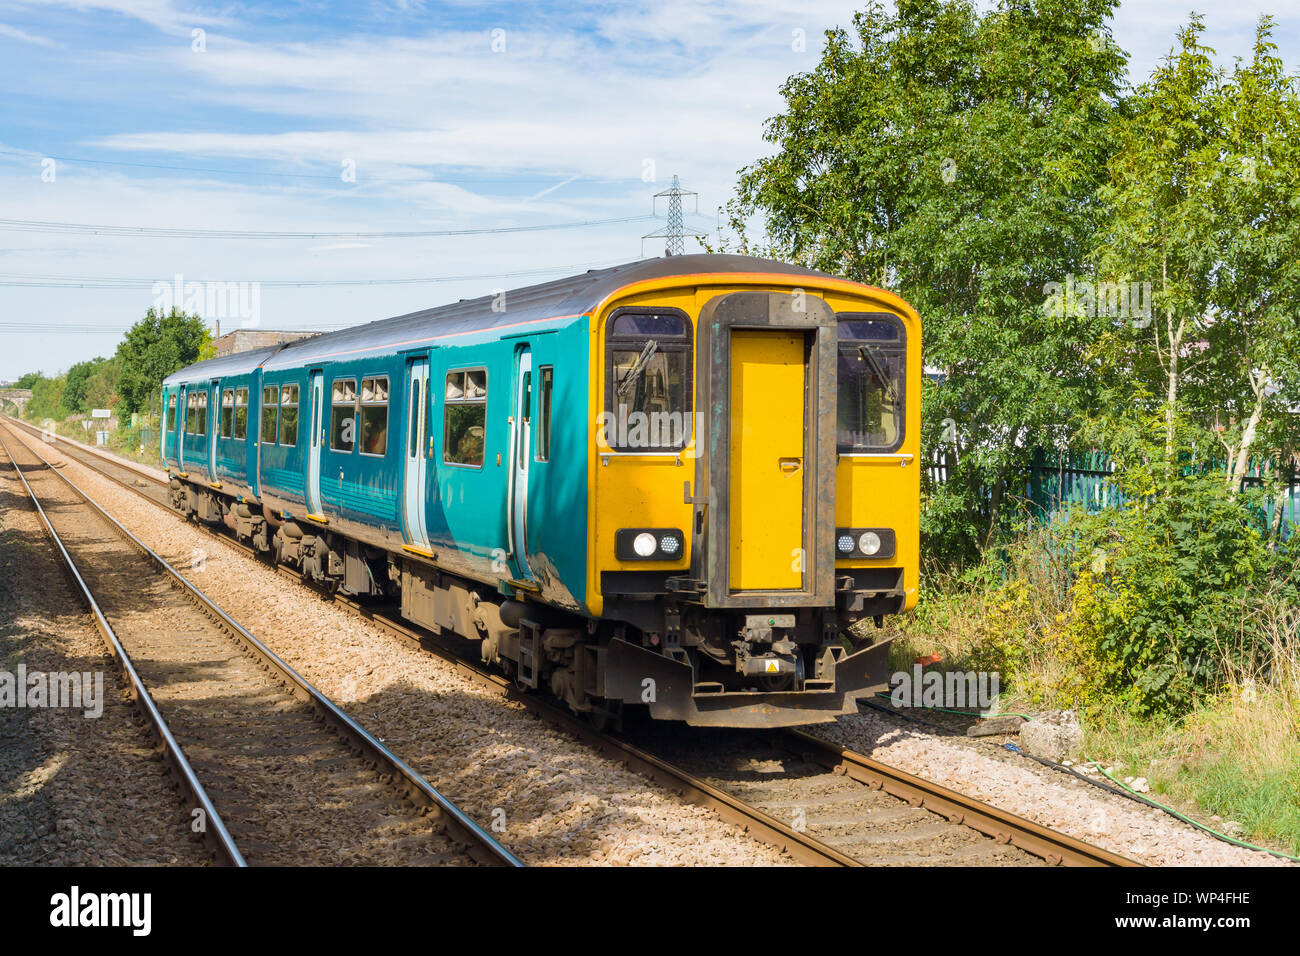 Generic diesel multiple unit or DMU train on a British railway commonly used on rural and main rail lines for commuter services in the UK Stock Photo